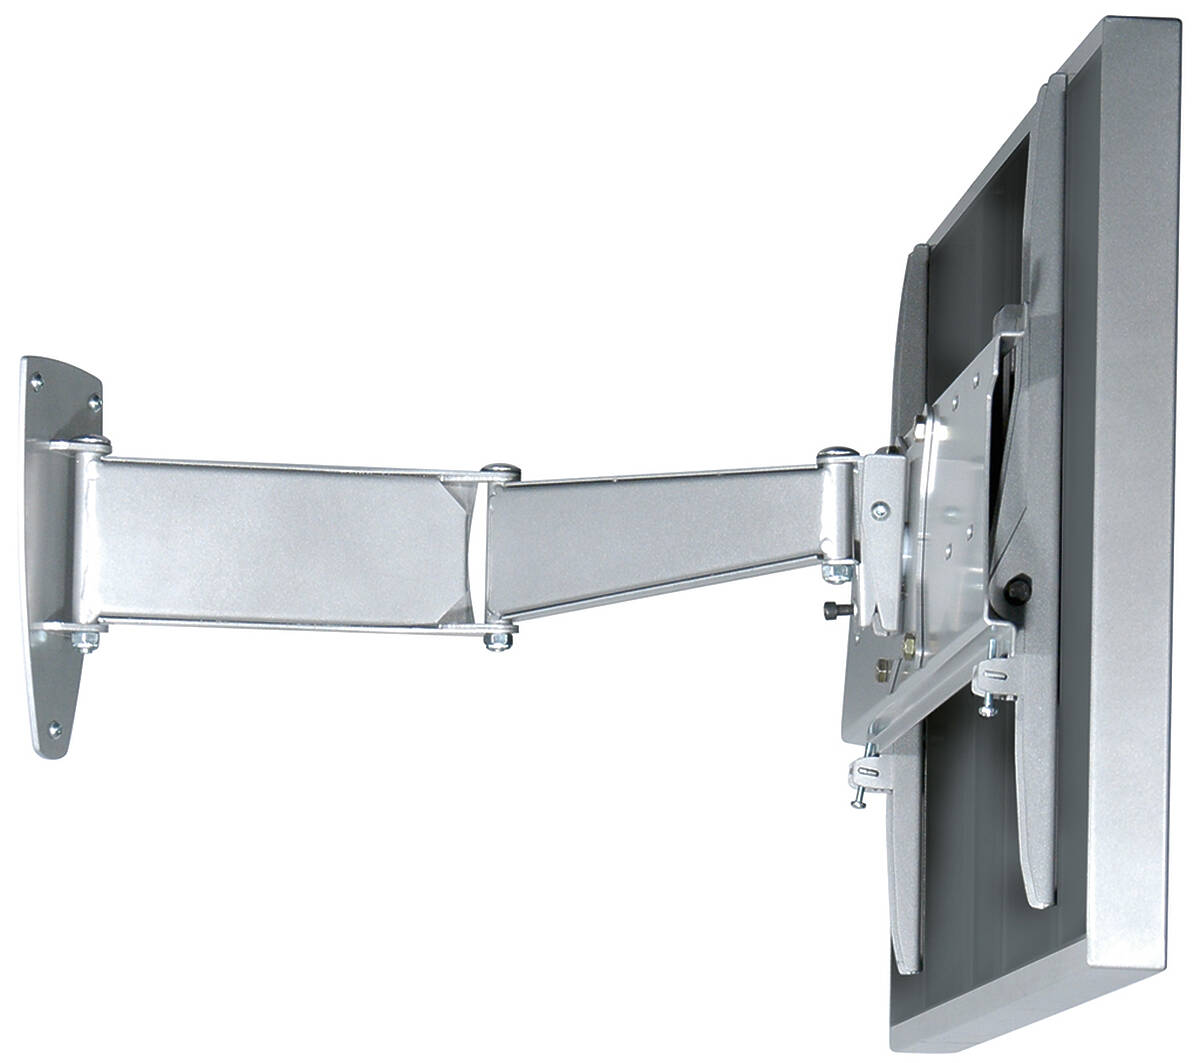 Unicol PLA1X3 Panarm Heavy Duty Dual Arm Swing-out Wall Mount for monitors 33-57" product image. Click to enlarge.